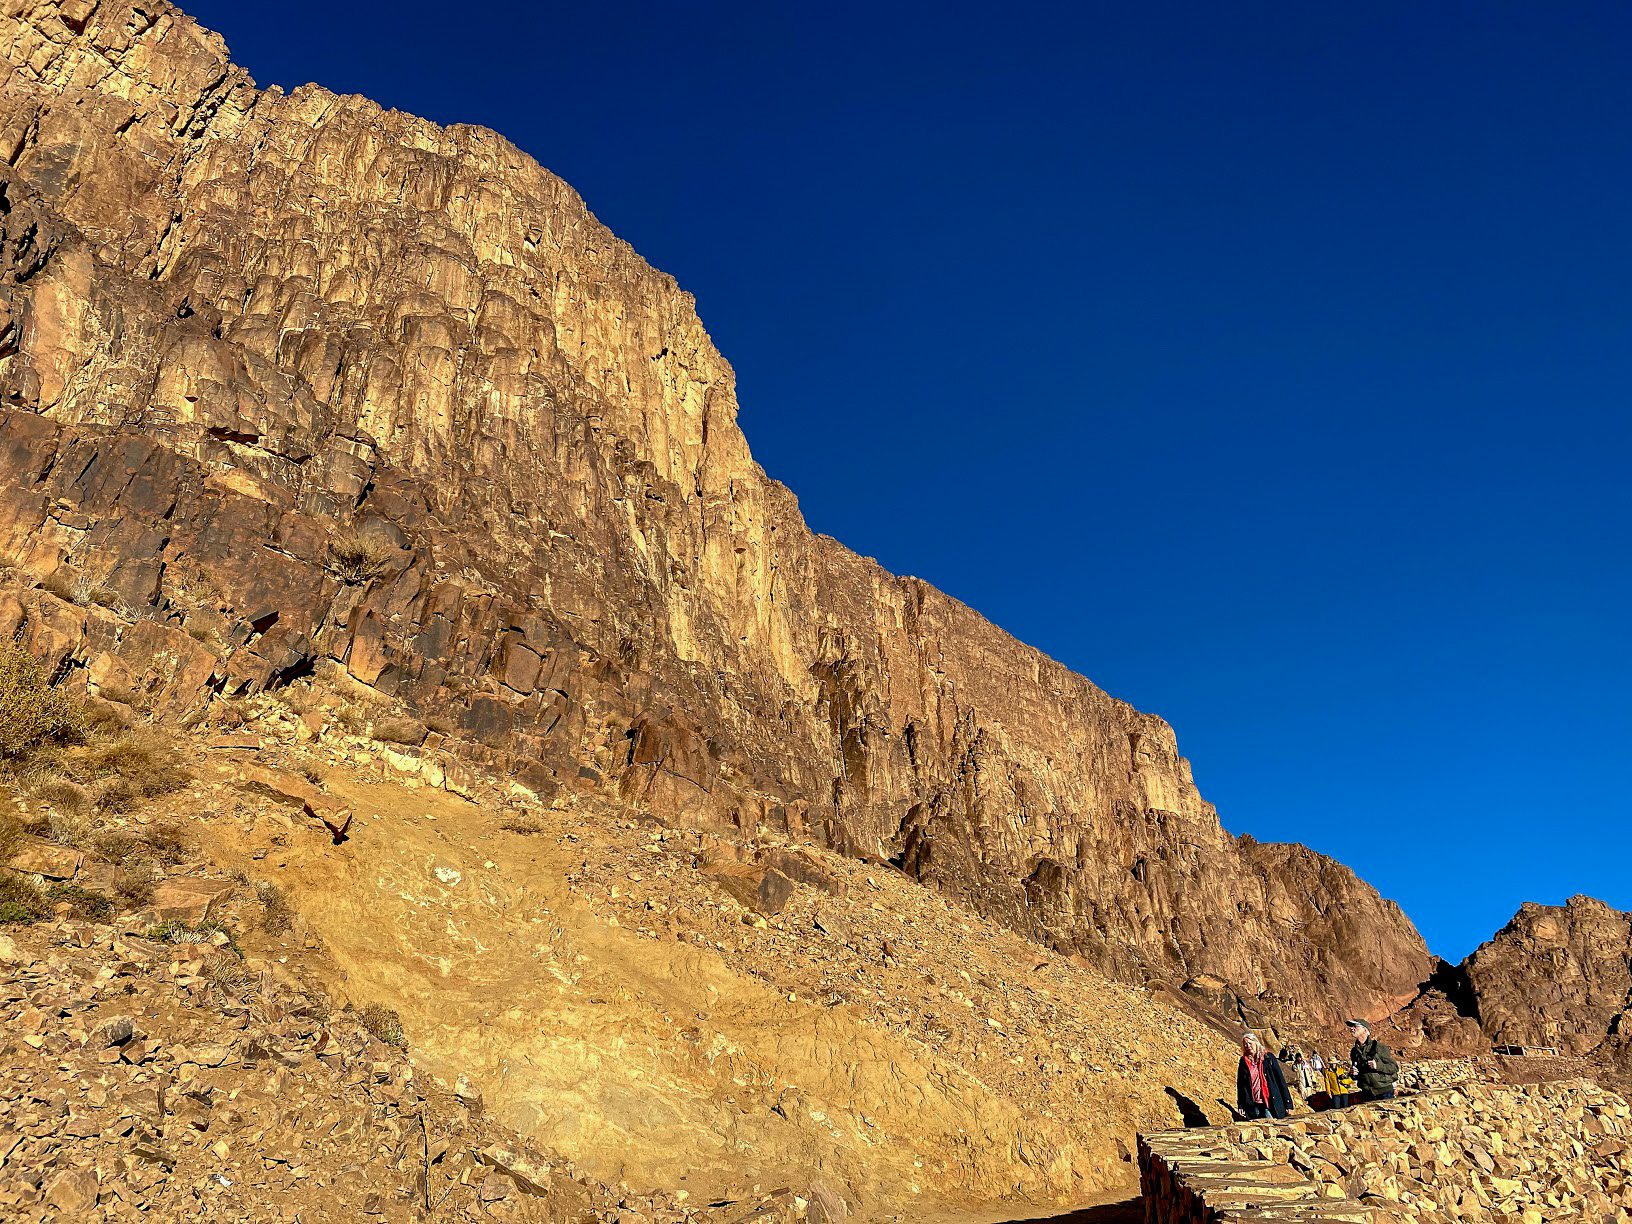 the sheer cliffs along the side of the path on Mount Sinai, Egypt